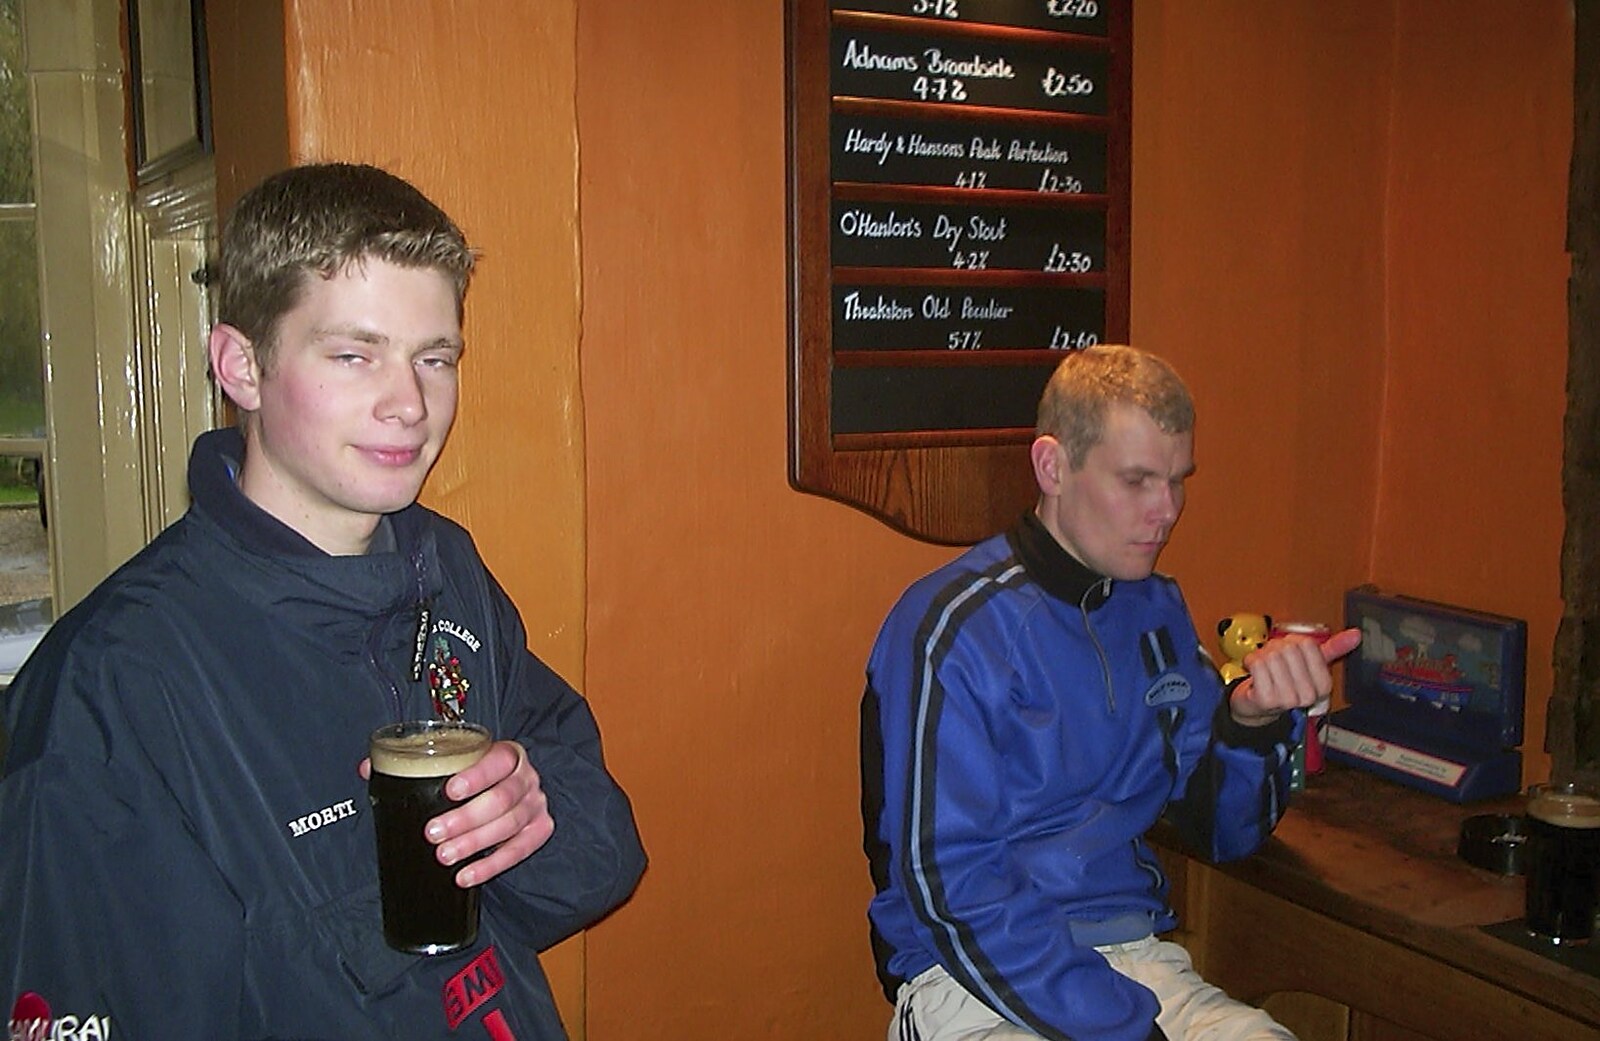 The BSCC's Evil Valentine's Day Bike Ride, Harleston, Norfolk - 14th February 2004: Phil and Bill in the Hoxne Swan: Broadside £2.50